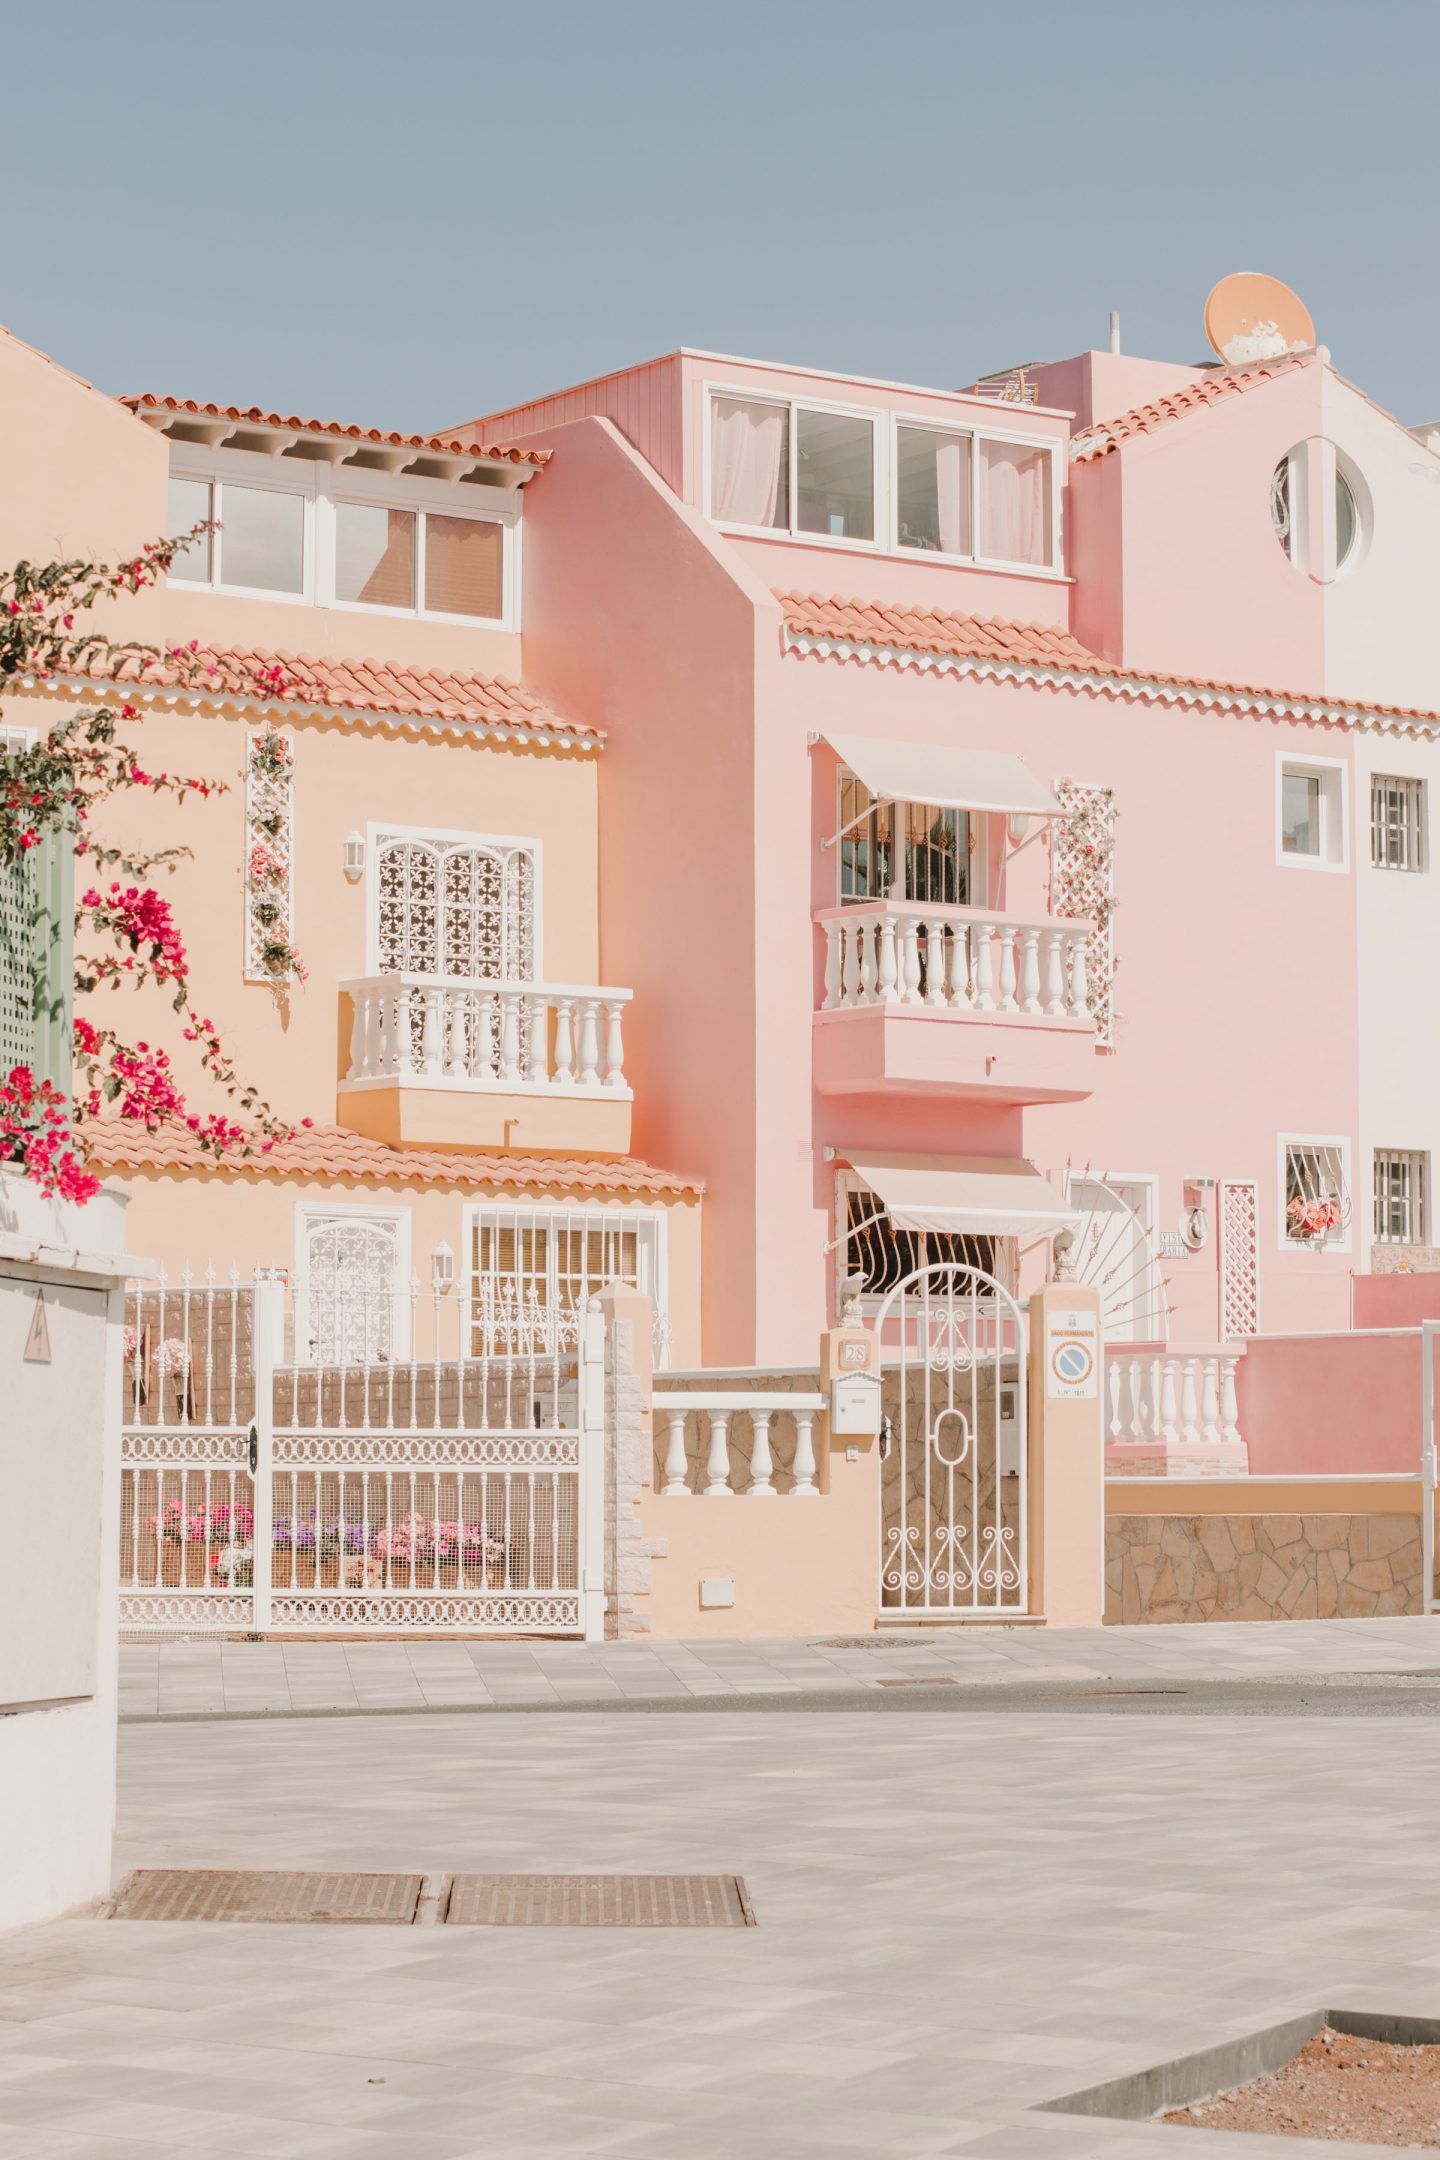 A row of pink houses with white fences and railings. - Cute pink, architecture